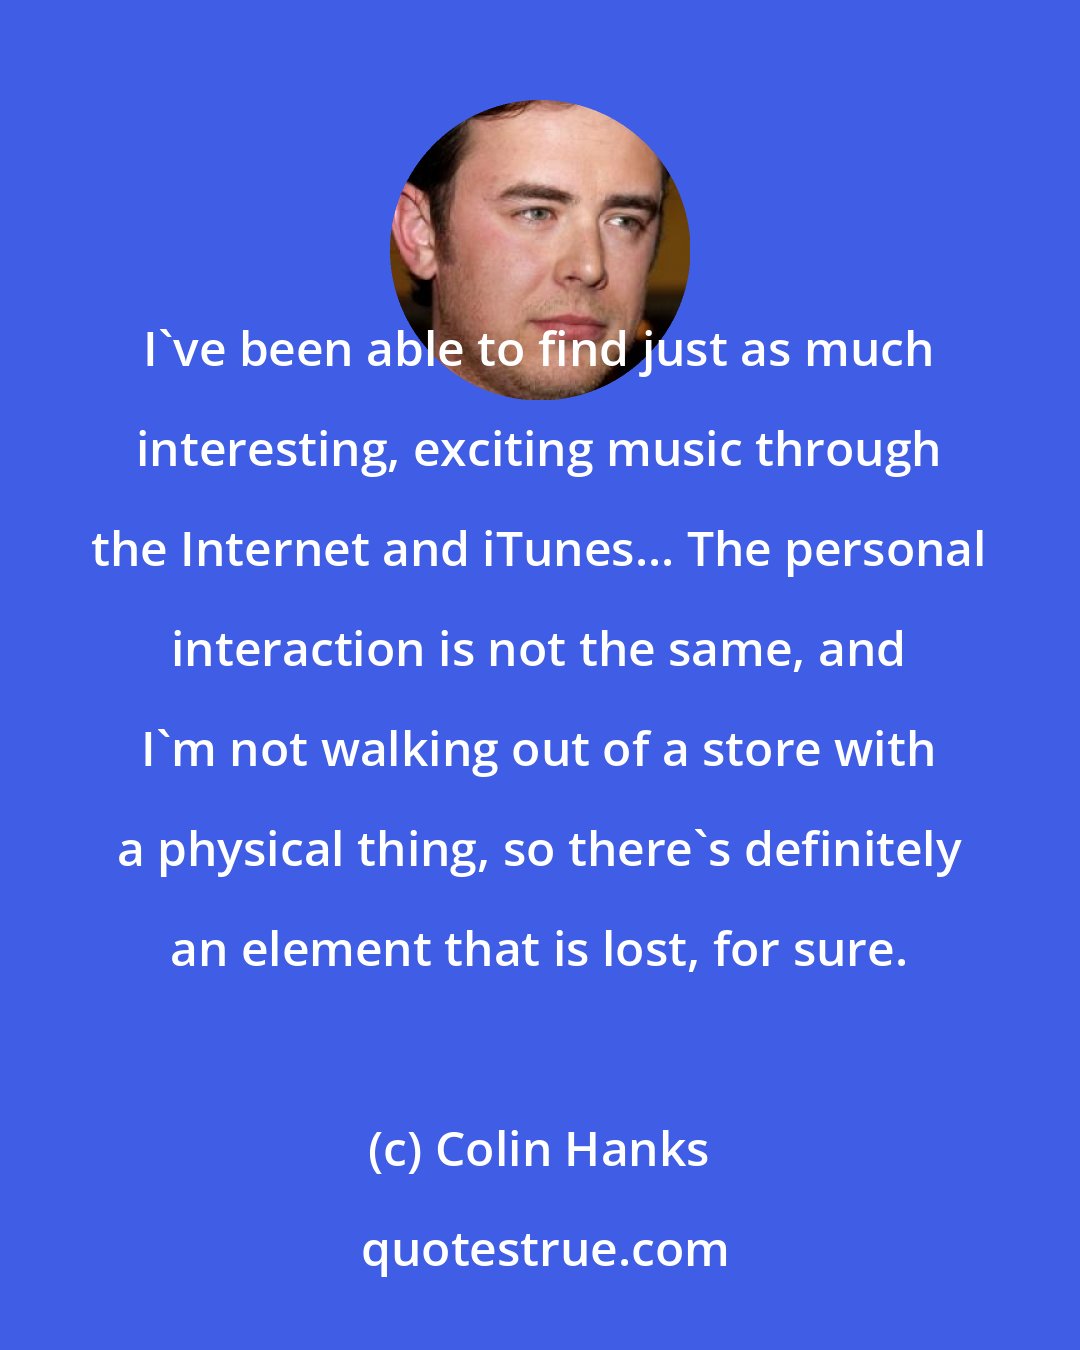 Colin Hanks: I've been able to find just as much interesting, exciting music through the Internet and iTunes... The personal interaction is not the same, and I'm not walking out of a store with a physical thing, so there's definitely an element that is lost, for sure.